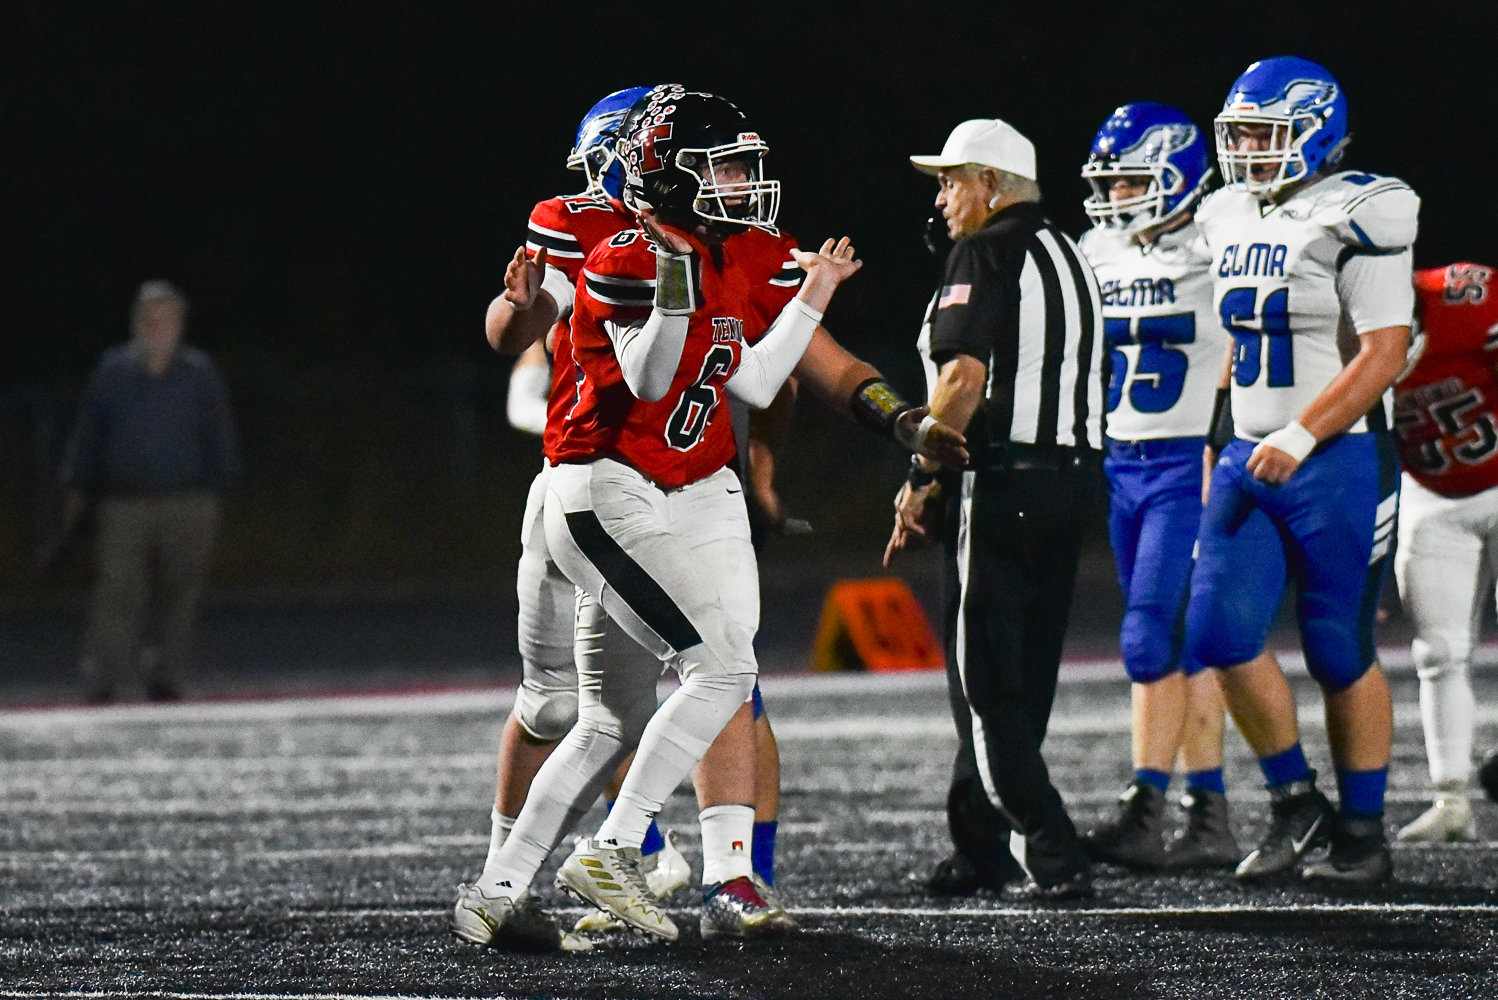 Mikey Vassar gives a little shrug to the sideline after a sack during Tenino's 66-26 win over Elma on Oct. 14.